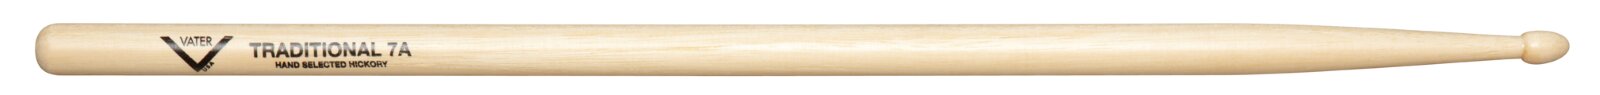 Vater 7A Traditional : photo 1